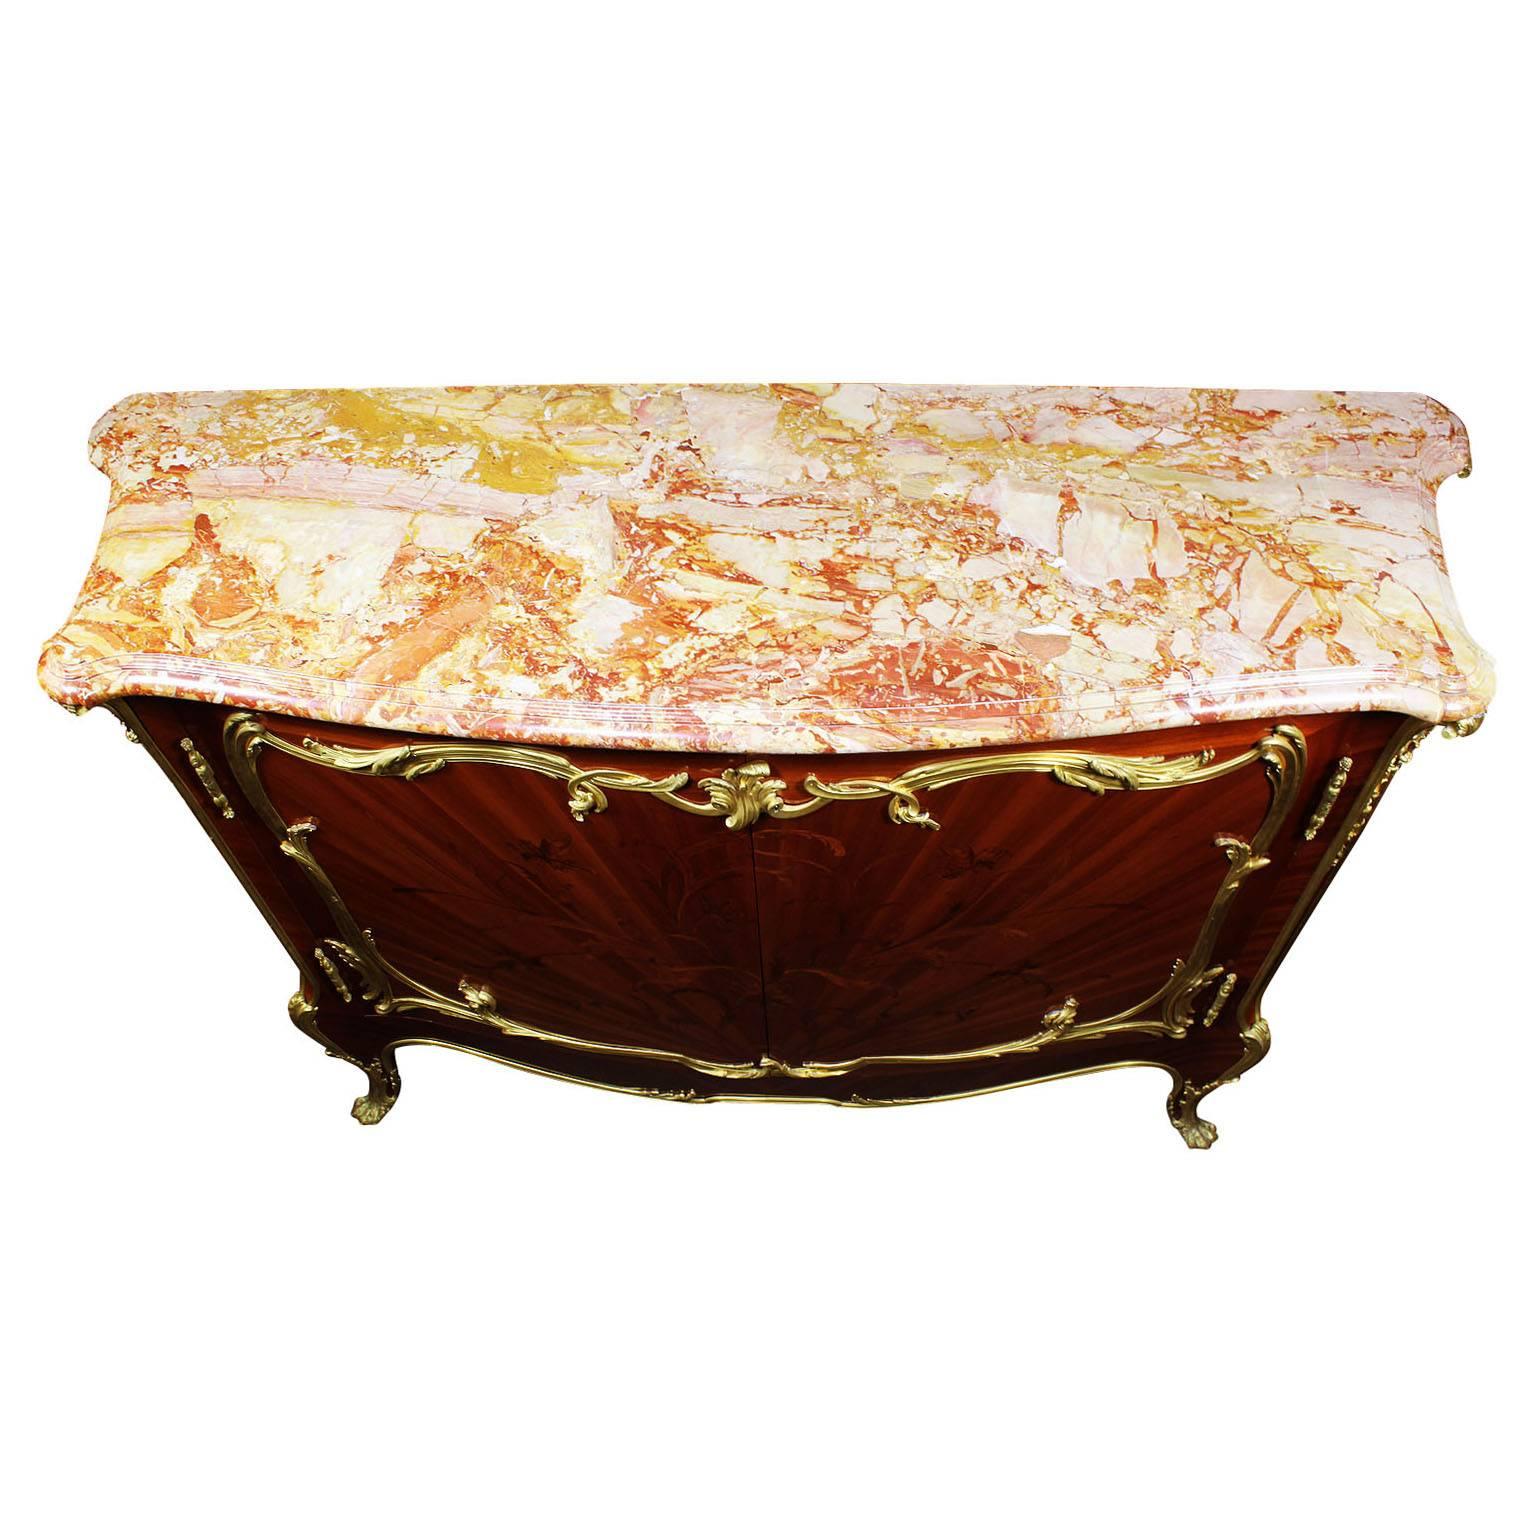 Marble French 19th Century Louis XV Style Ormolu Mounted Marquetry Meuble D'appui For Sale